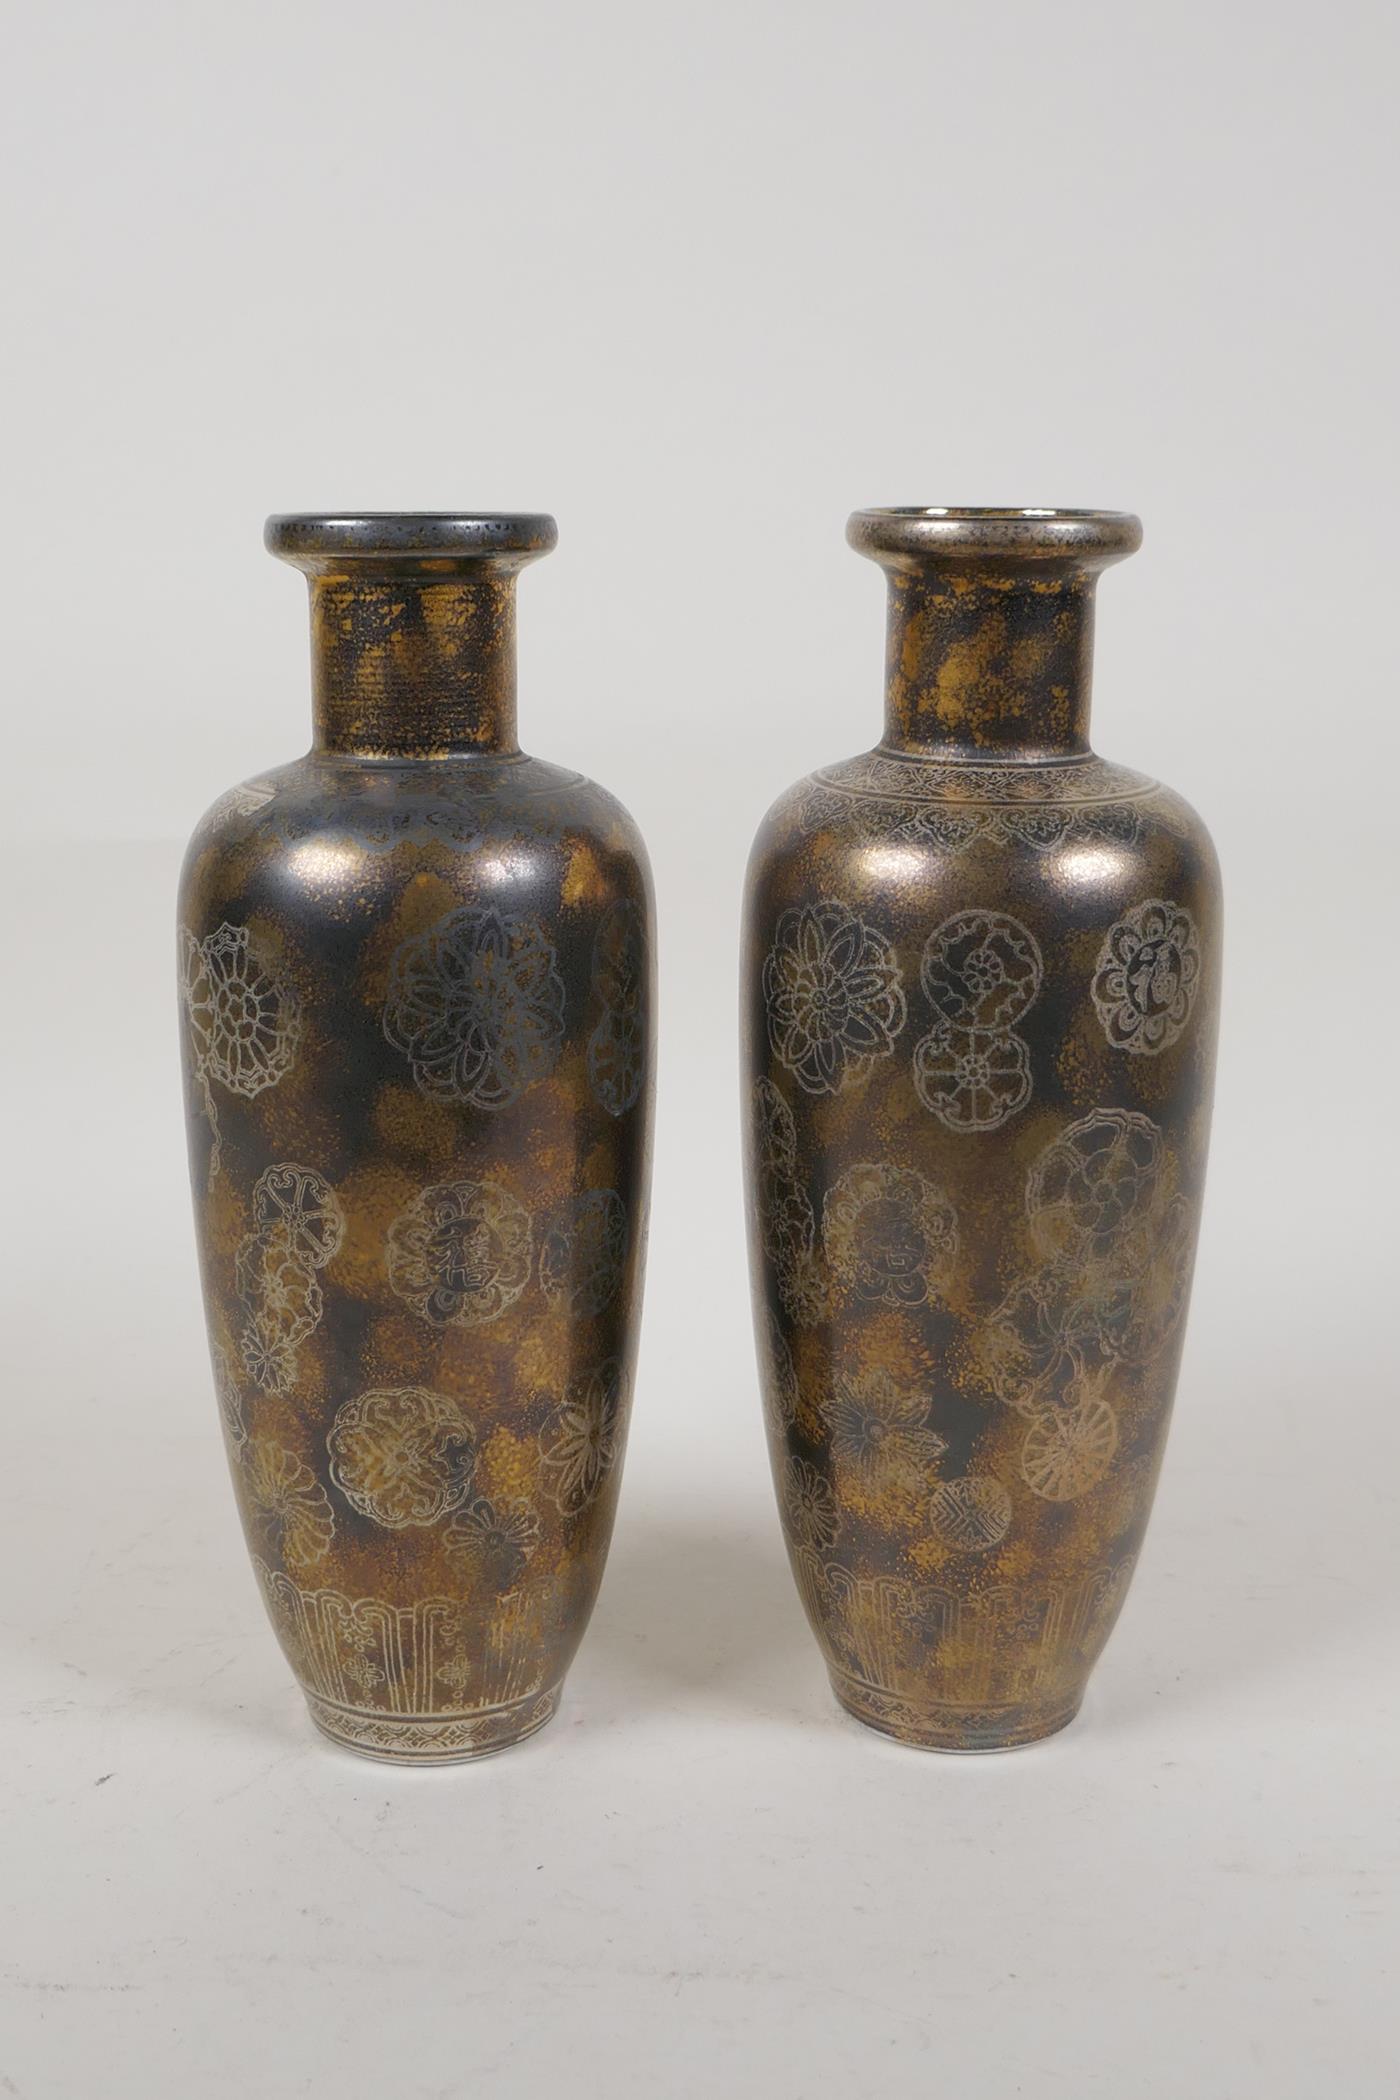 A pair of lustre glazed porcelain vases with floral and character decoration, Chinese 4 character